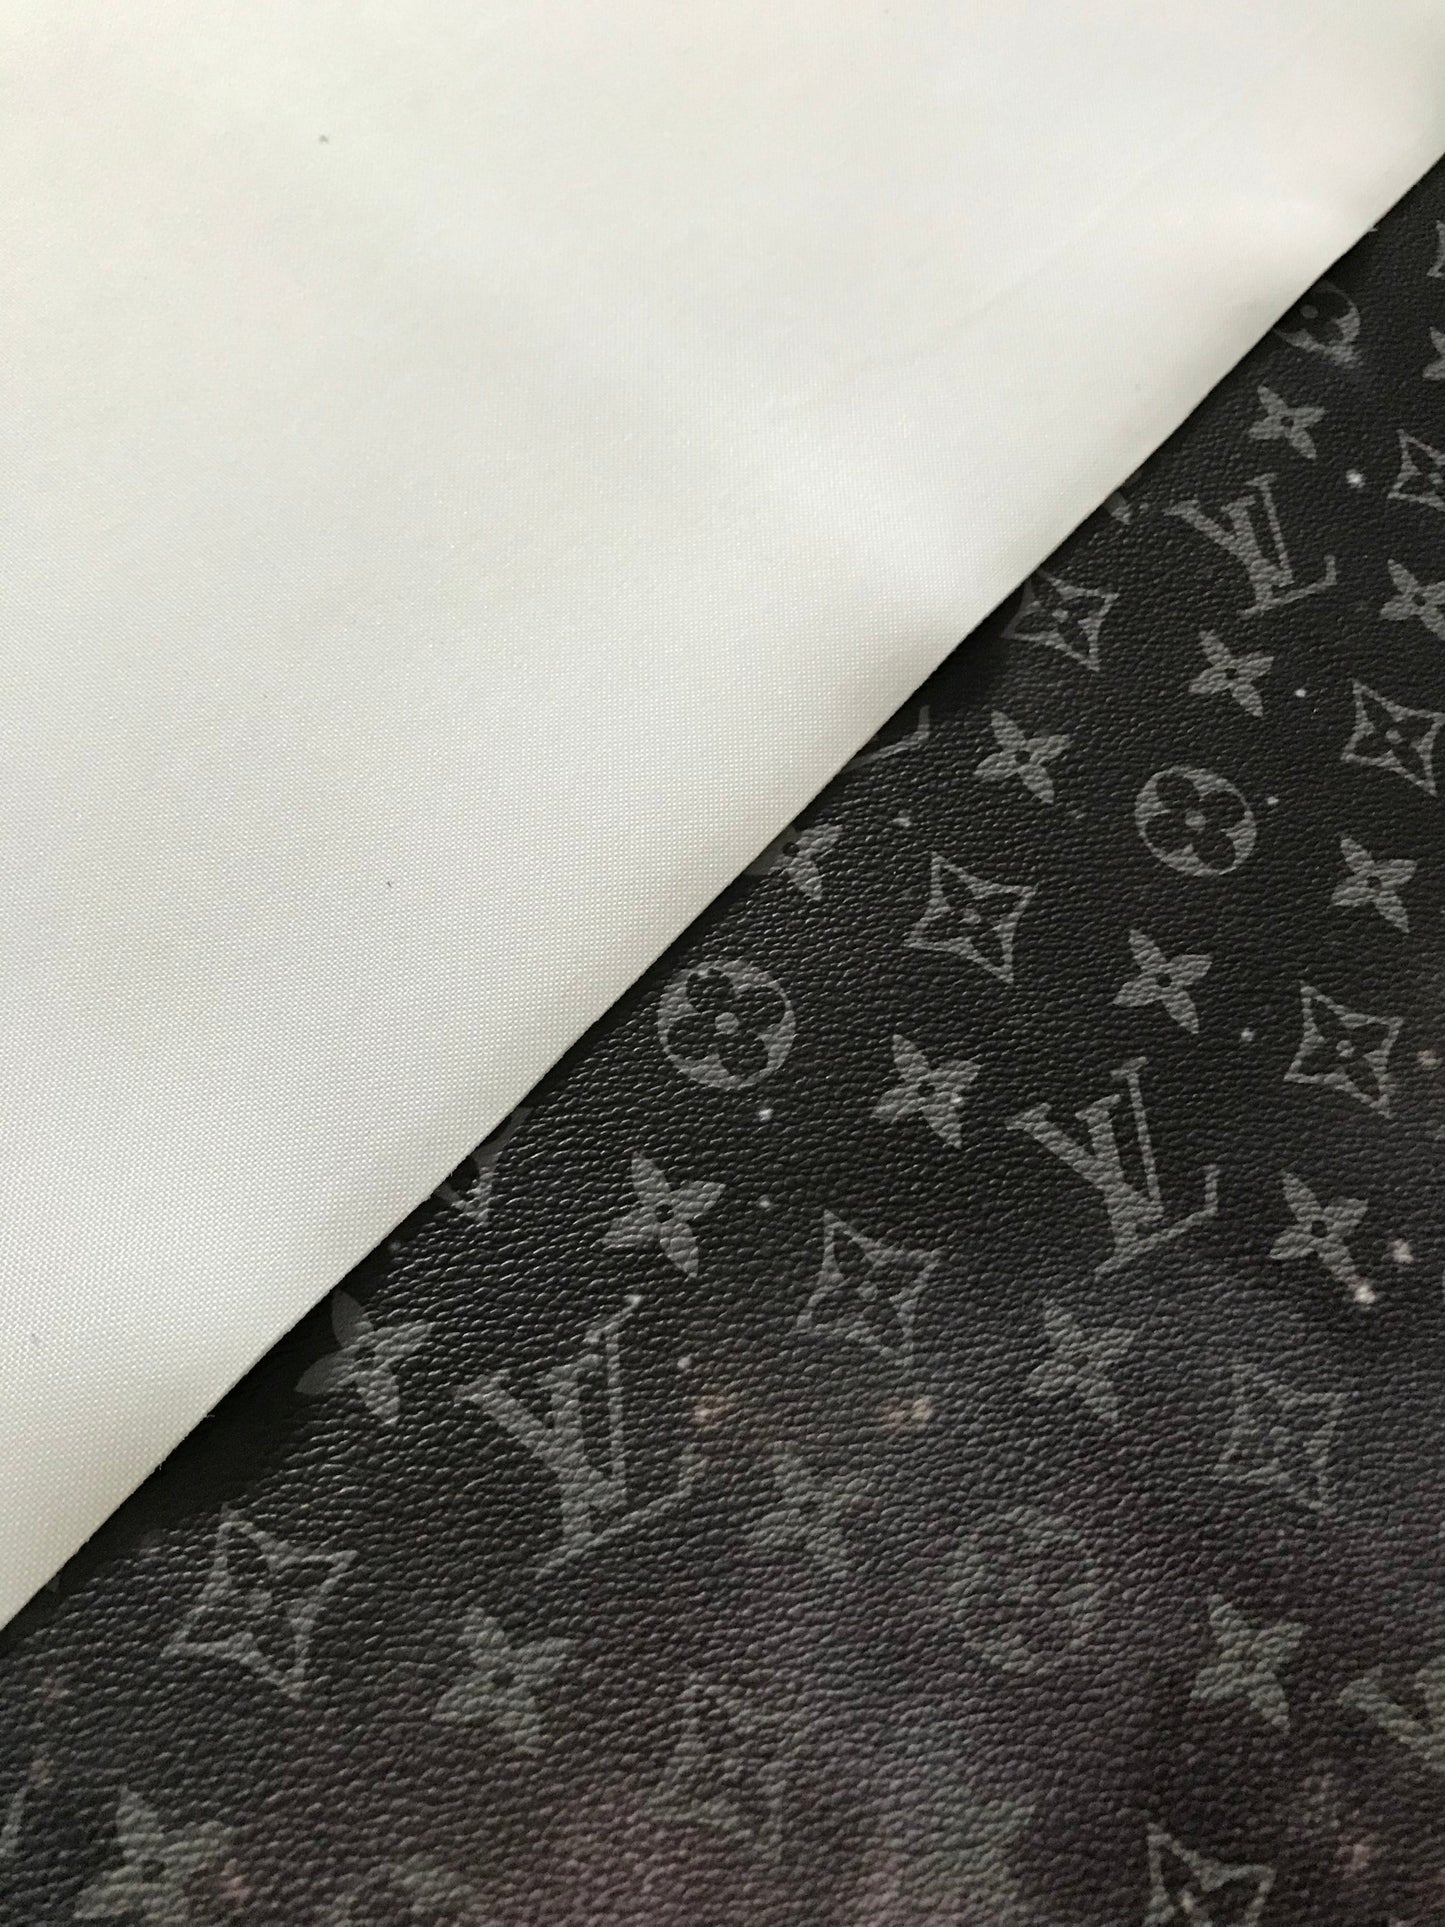 New Trending Galaxy LV Leather Fabric for Bag Shoe Customs